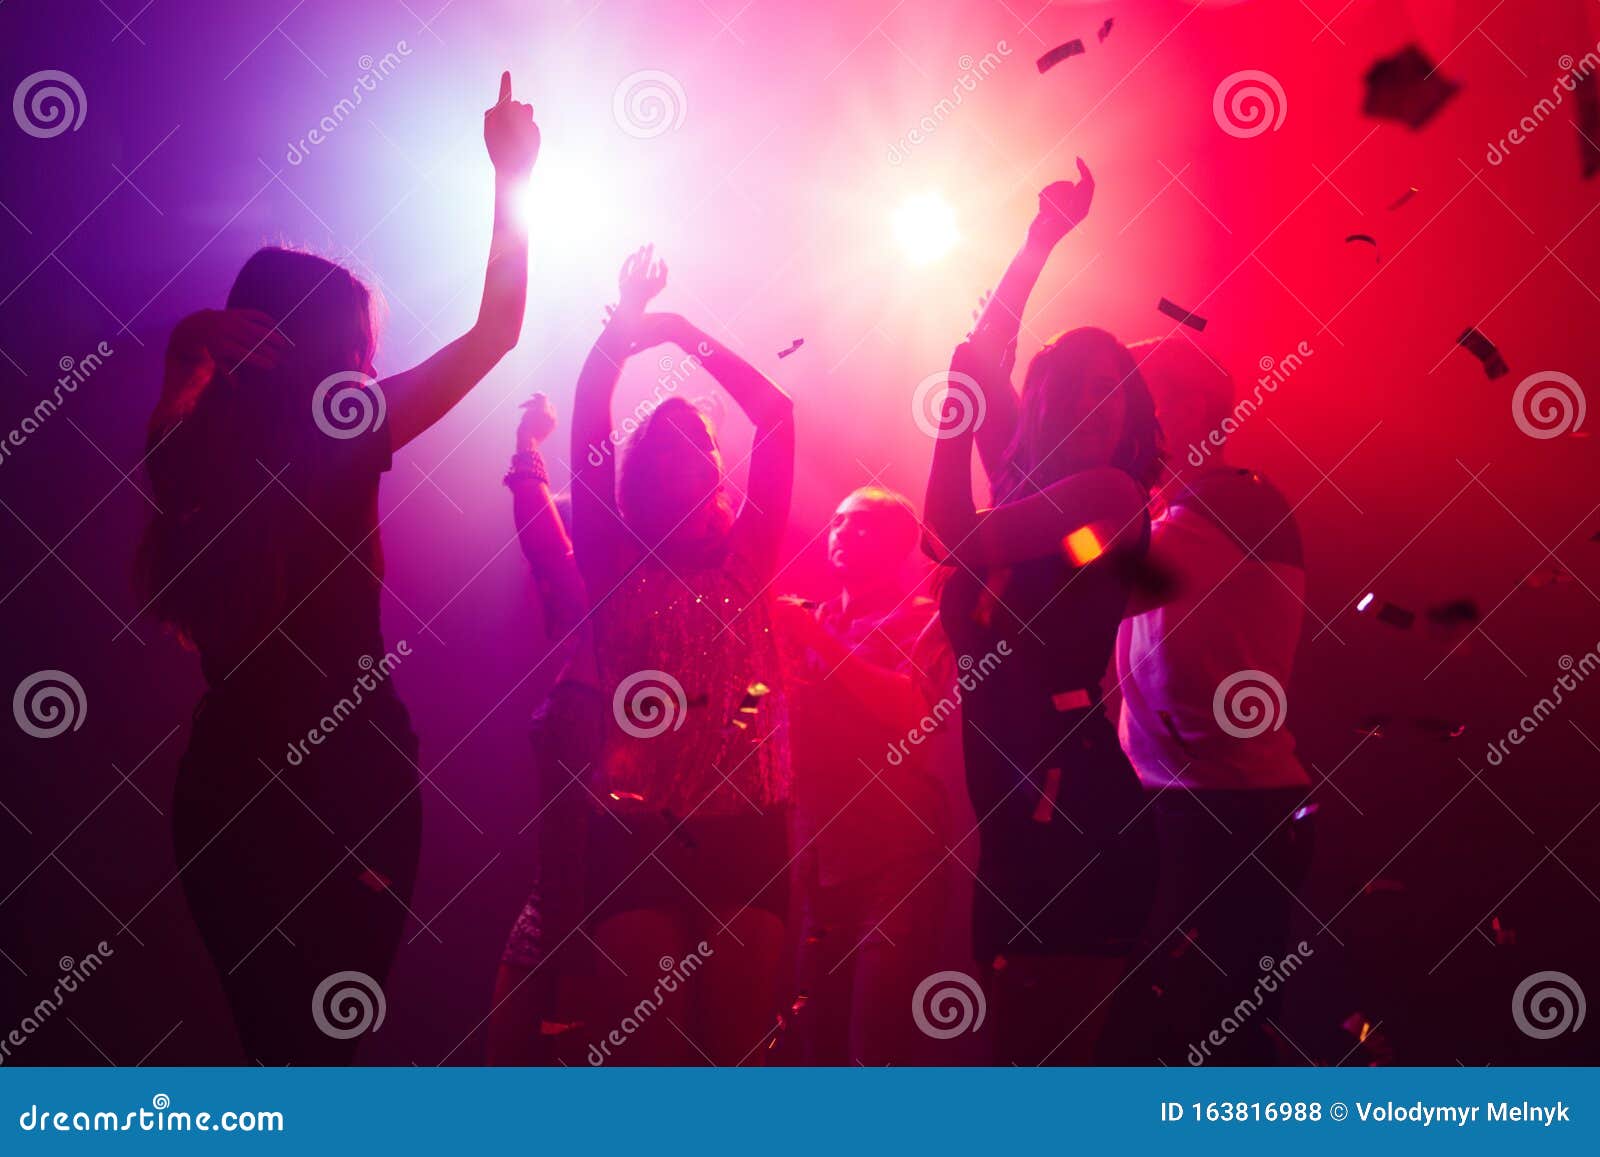 A Crowd of People in Silhouette Raises Their Hands Against Colorful ...